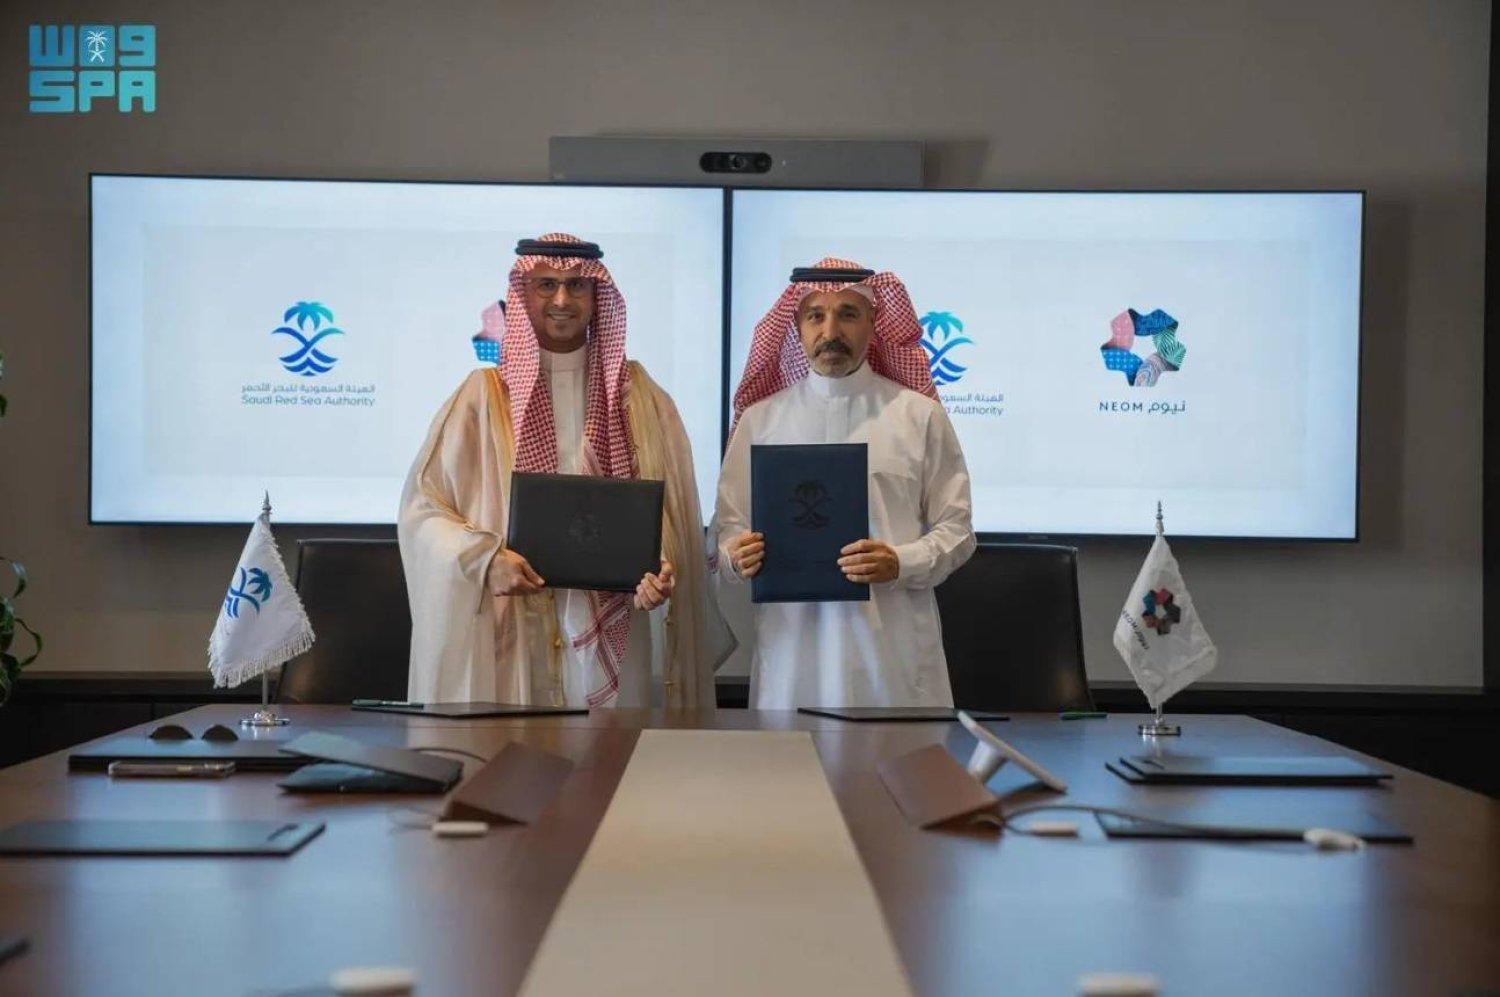 The MoU, signed by SRSA Acting CEO Mohammed Al-Nasser and NEOM CEO Nadhmi Al-Nasr, reflects SRSA's commitment to encouraging and attracting investment in coastal tourism activities. SPA